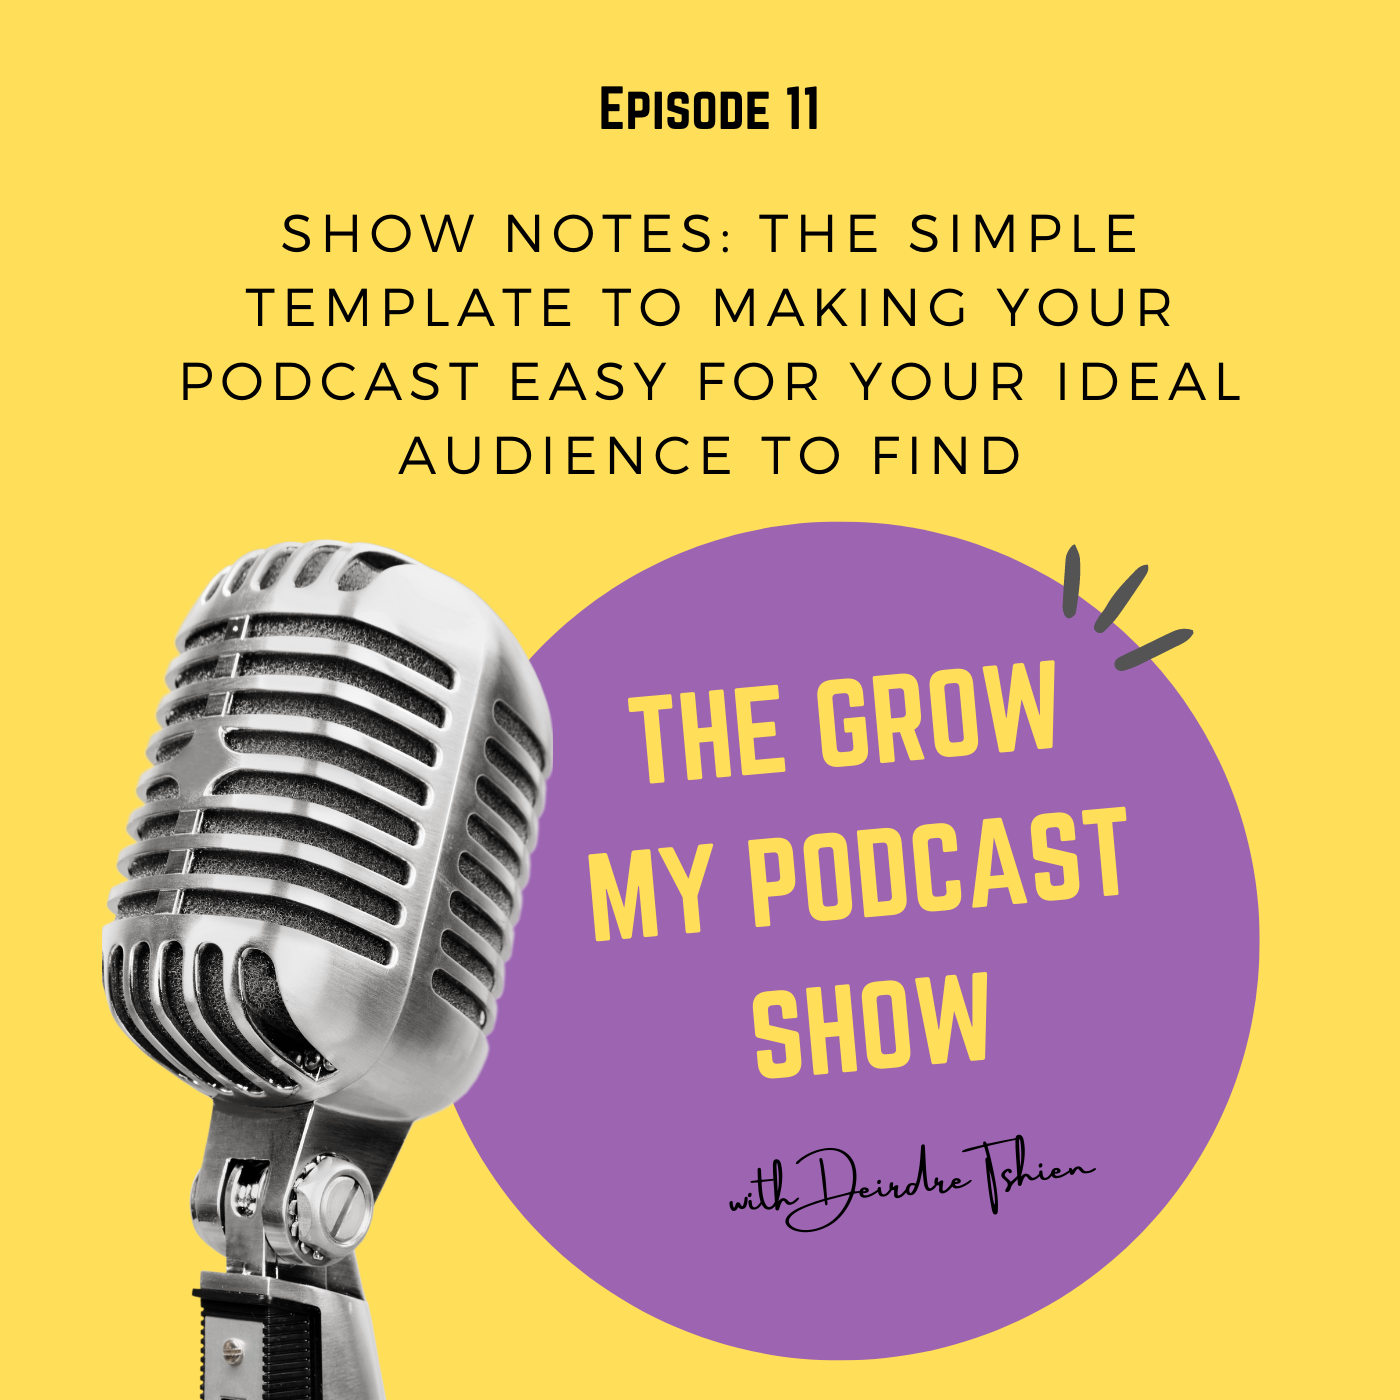 Show Notes: The Simple Template to Making Your Podcast Easy For Your Ideal Audience To Find